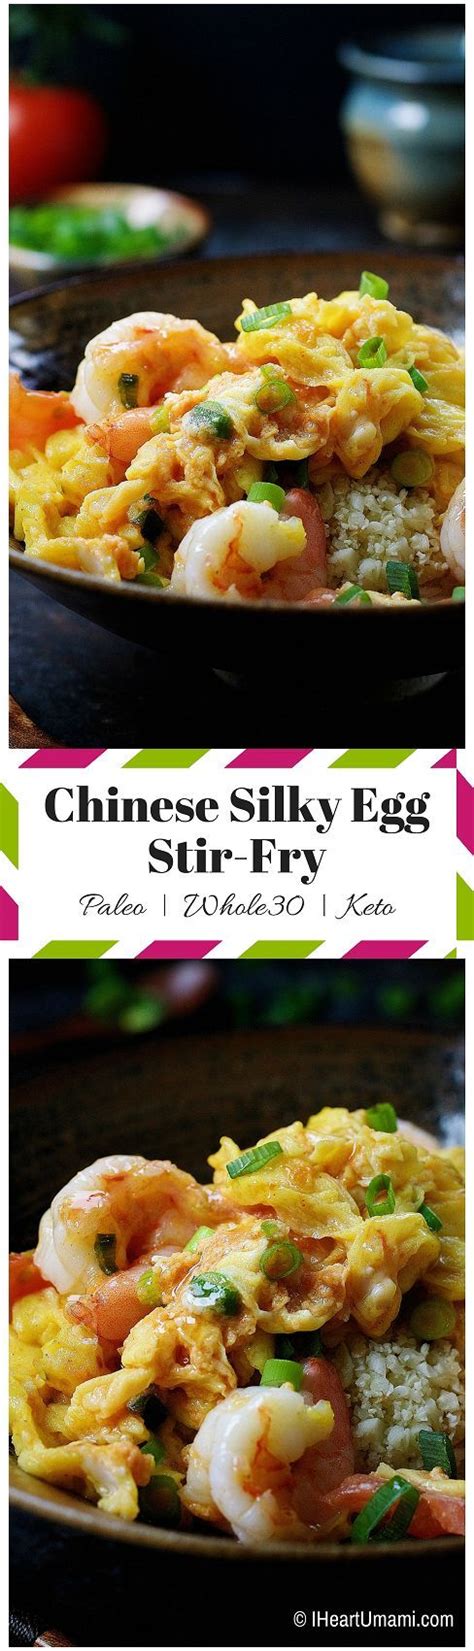 With mushrooms as the base, this recipe is made with 100% whole food plant food. Paleo Chinese Shrimp Tomato Stir Fry | Recipe | Food recipes, Asian recipes, Real food recipes